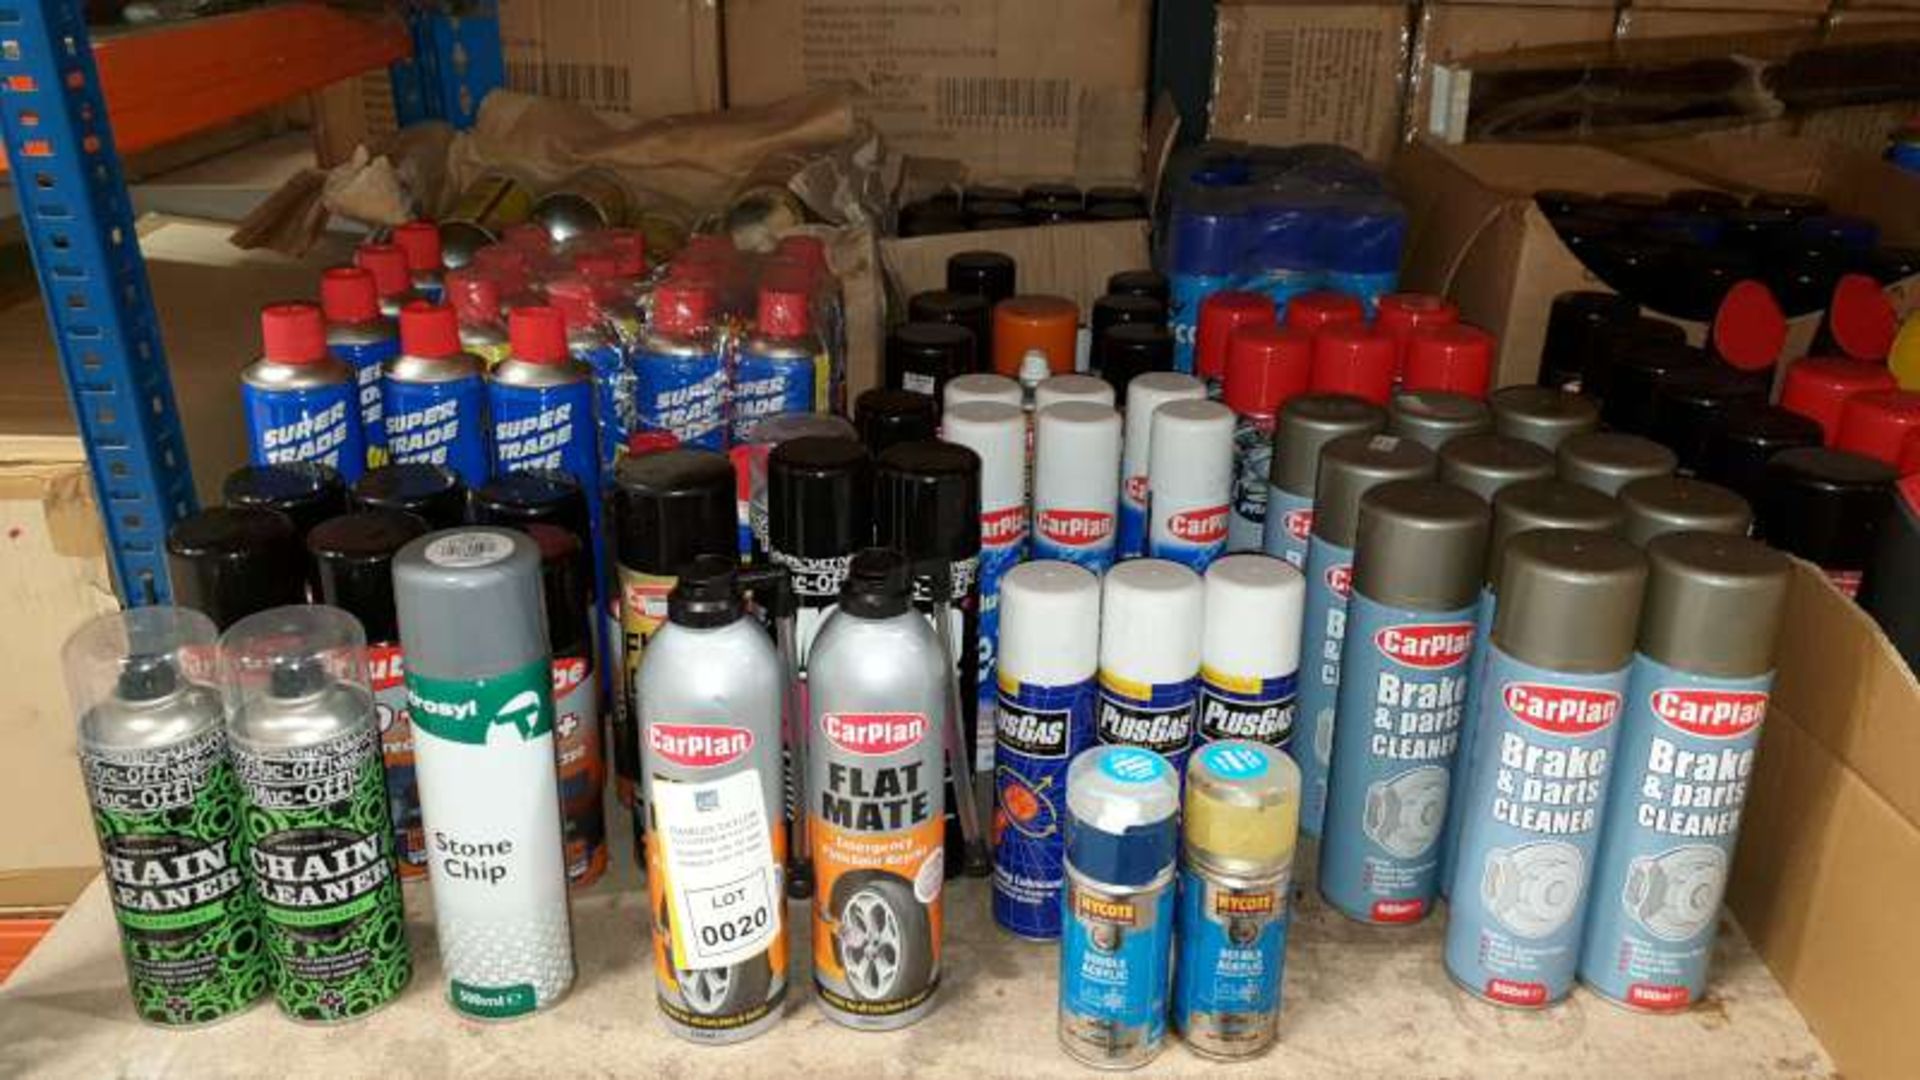 MIXED CAR LOT CONTAINING CHAIN CLEANER, CARPLAN PUNCTURE REPAIR, BRAKE AND PARTS CLEANER, DE-ICER,